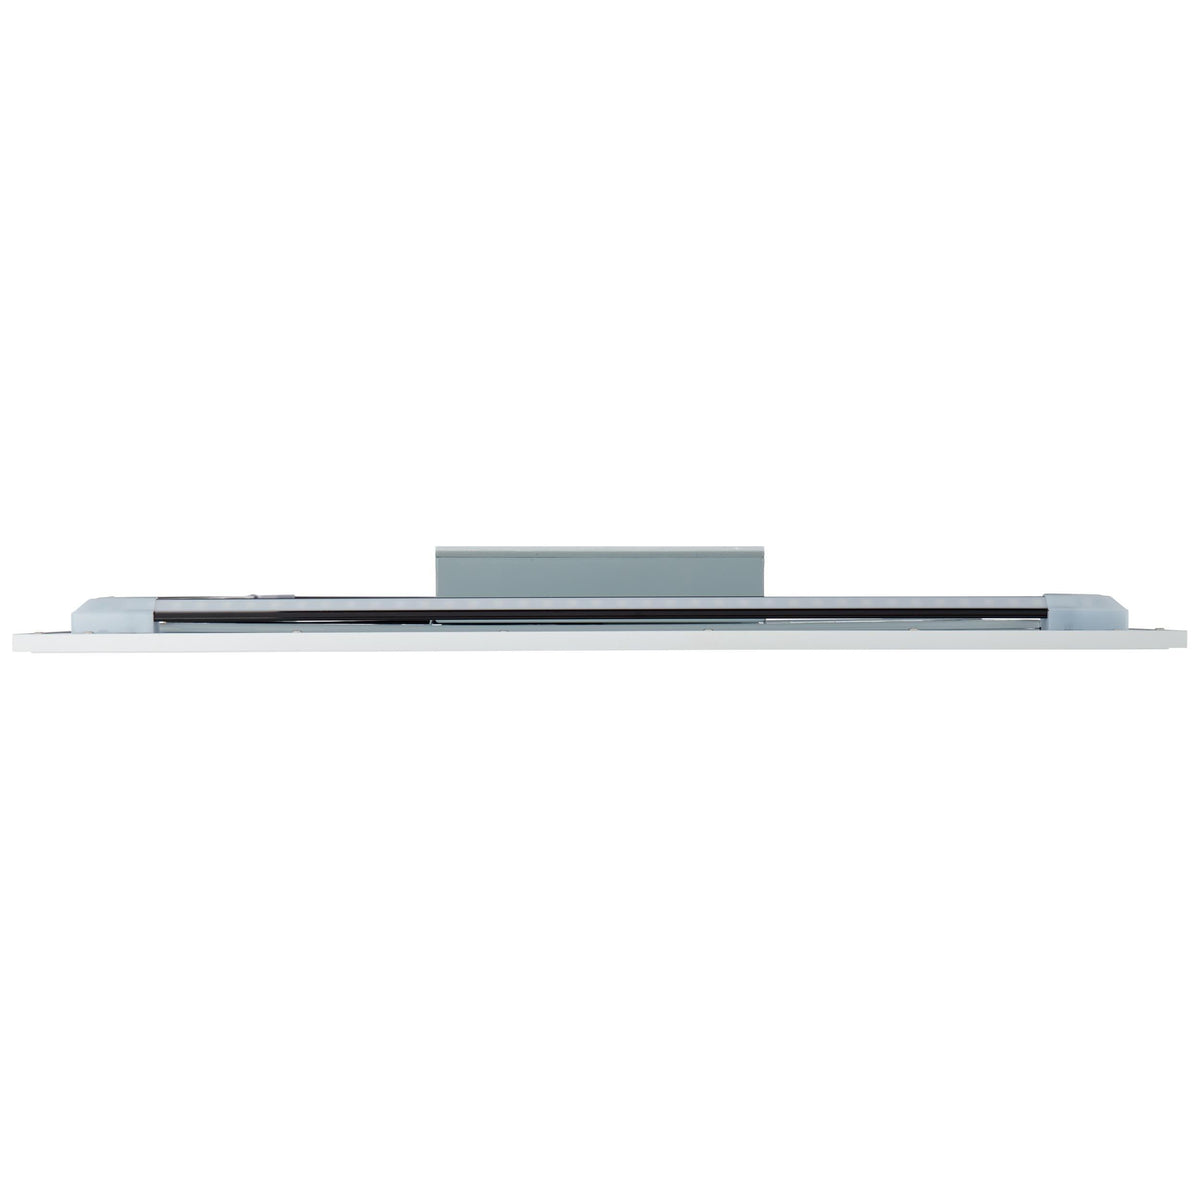 Brilliant 1 Light 39W Allie LED Ceiling Panel - White | G96947/05 from DID Electrical - guaranteed Irish, guaranteed quality service. (6977603829948)